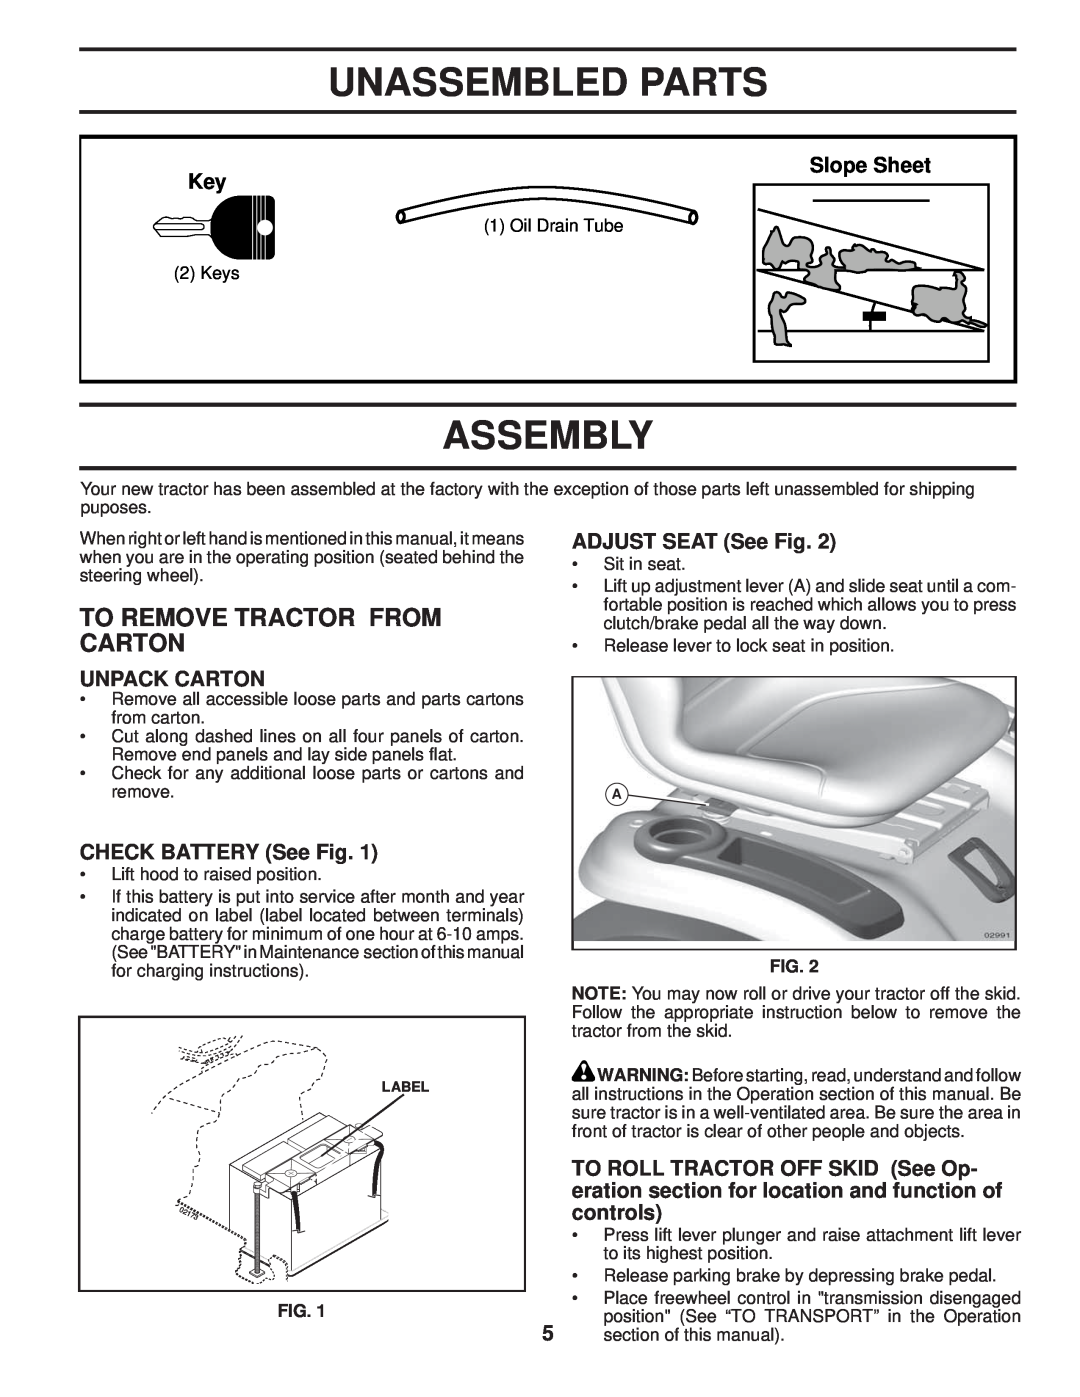 Poulan PB22TH42YT manual Unassembled Parts, Assembly, To Remove Tractor From Carton, Slope Sheet Key, Unpack Carton 